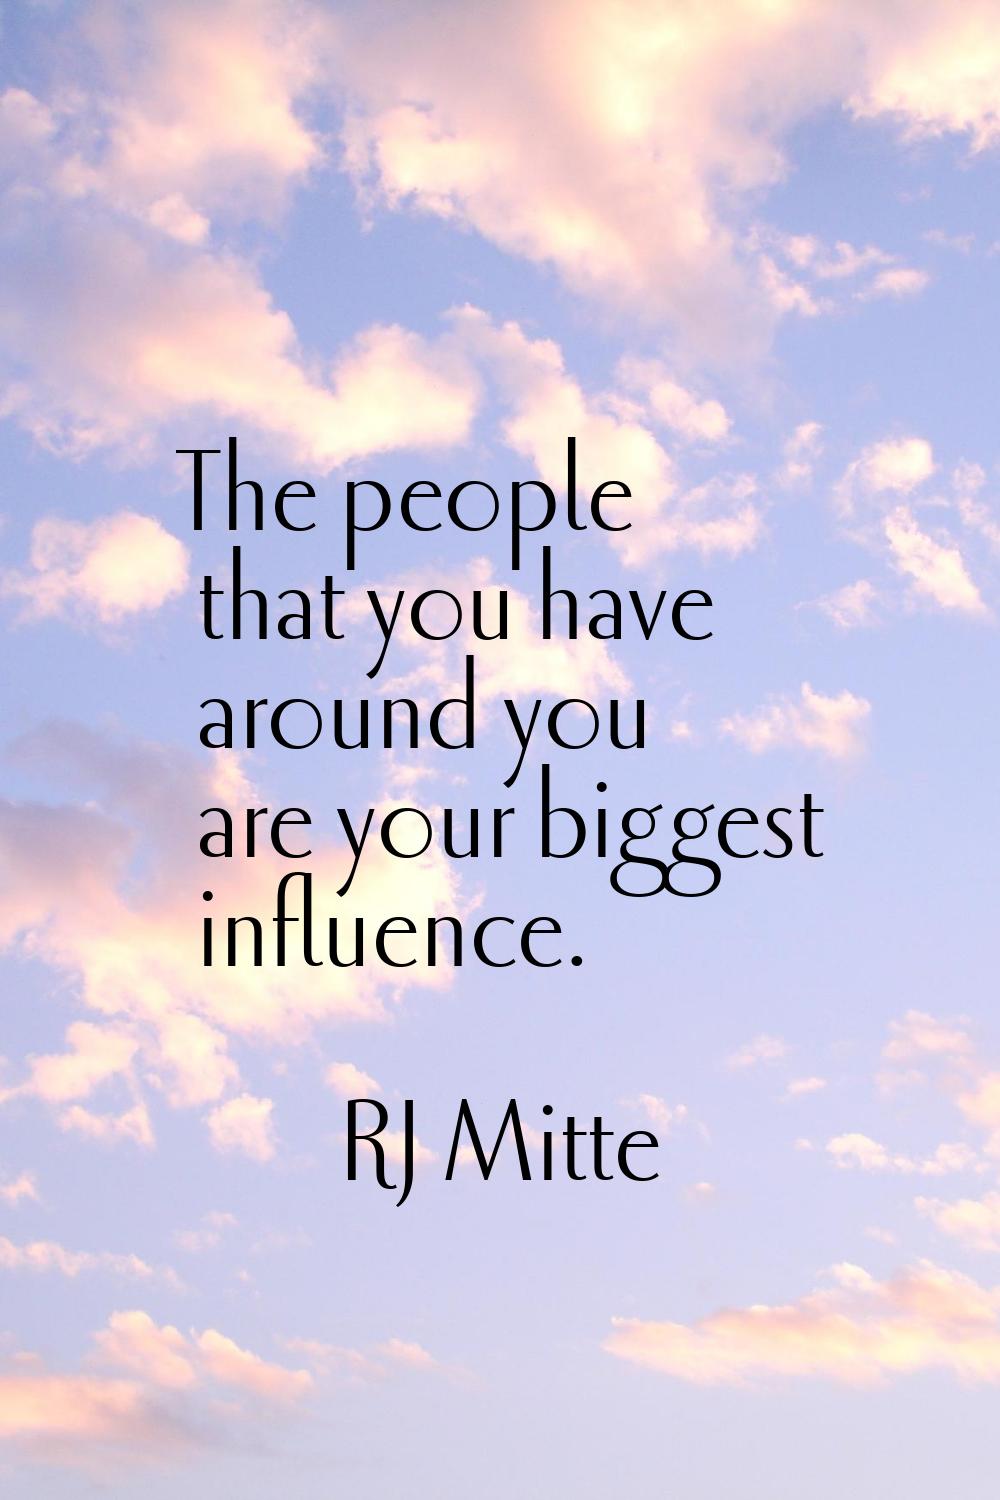 The people that you have around you are your biggest influence.